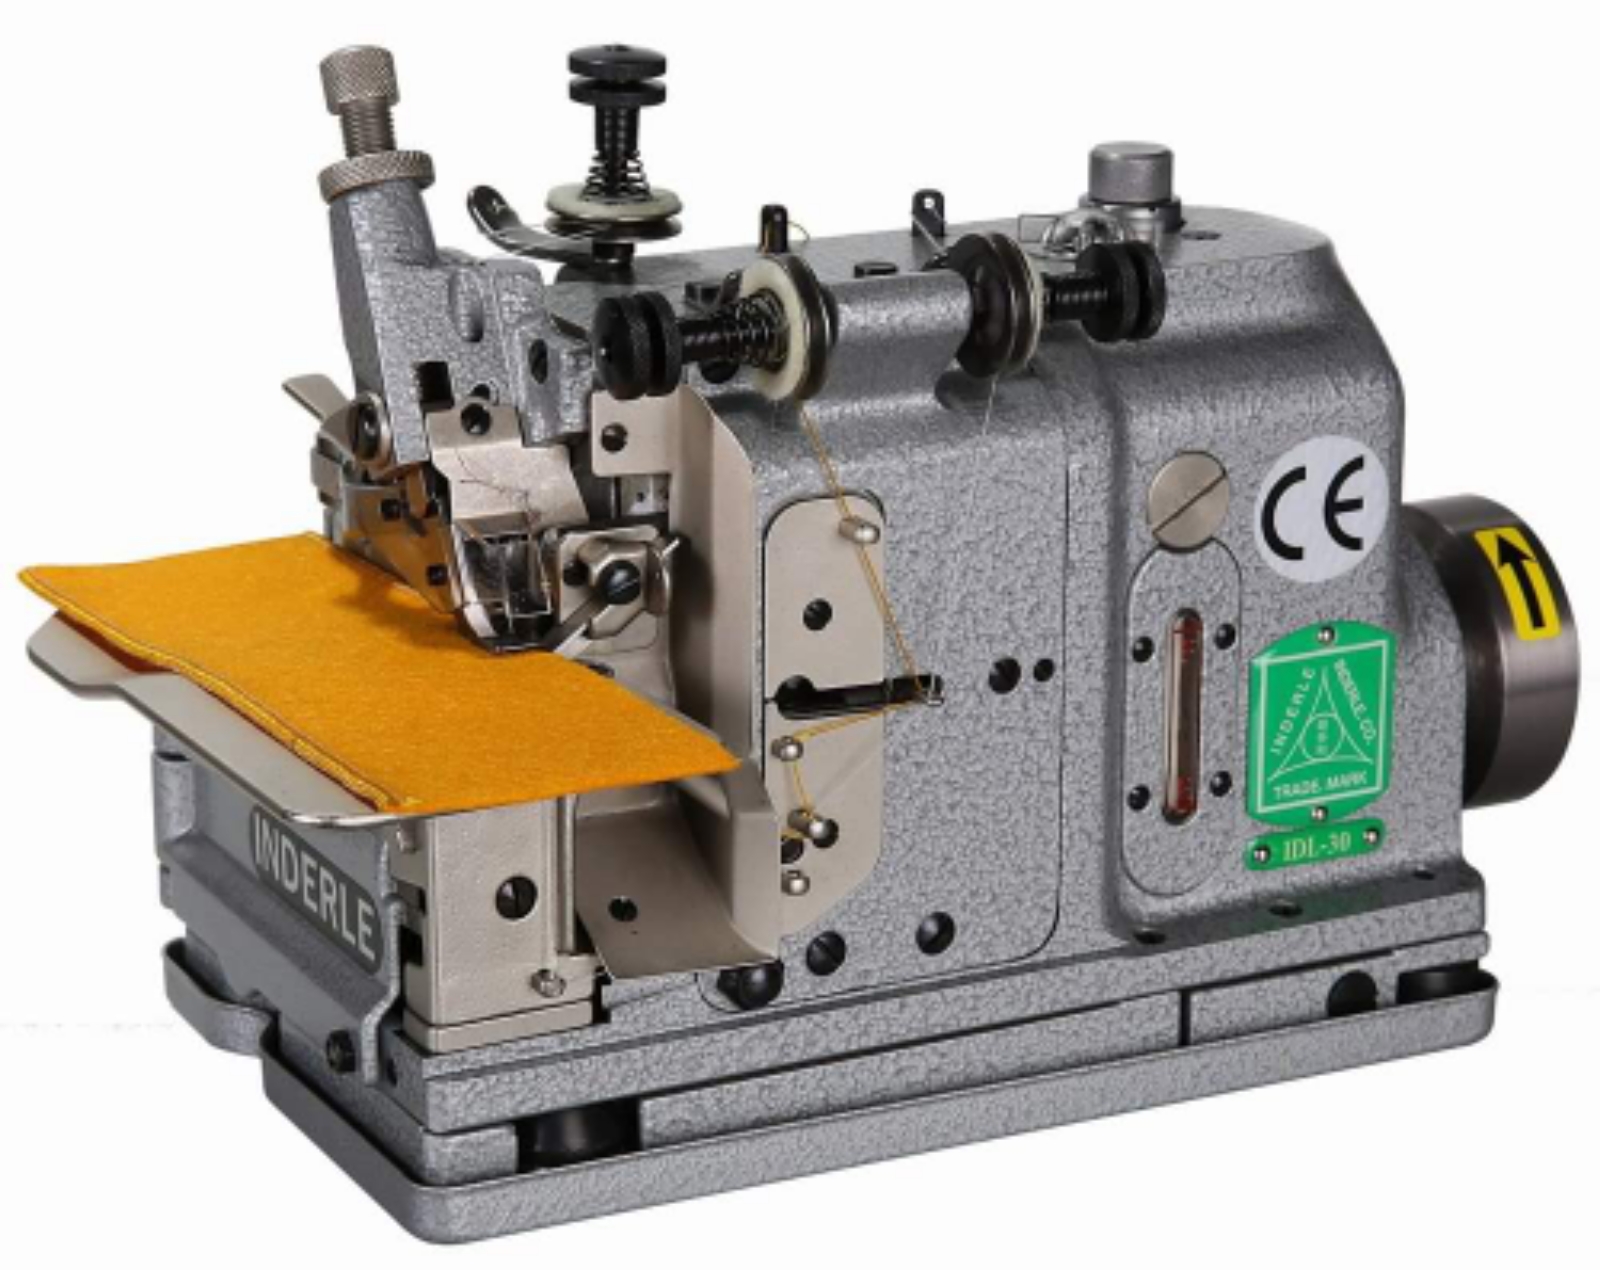 SPECIAL ETITION OVERLOCK SEWING MACHINE 